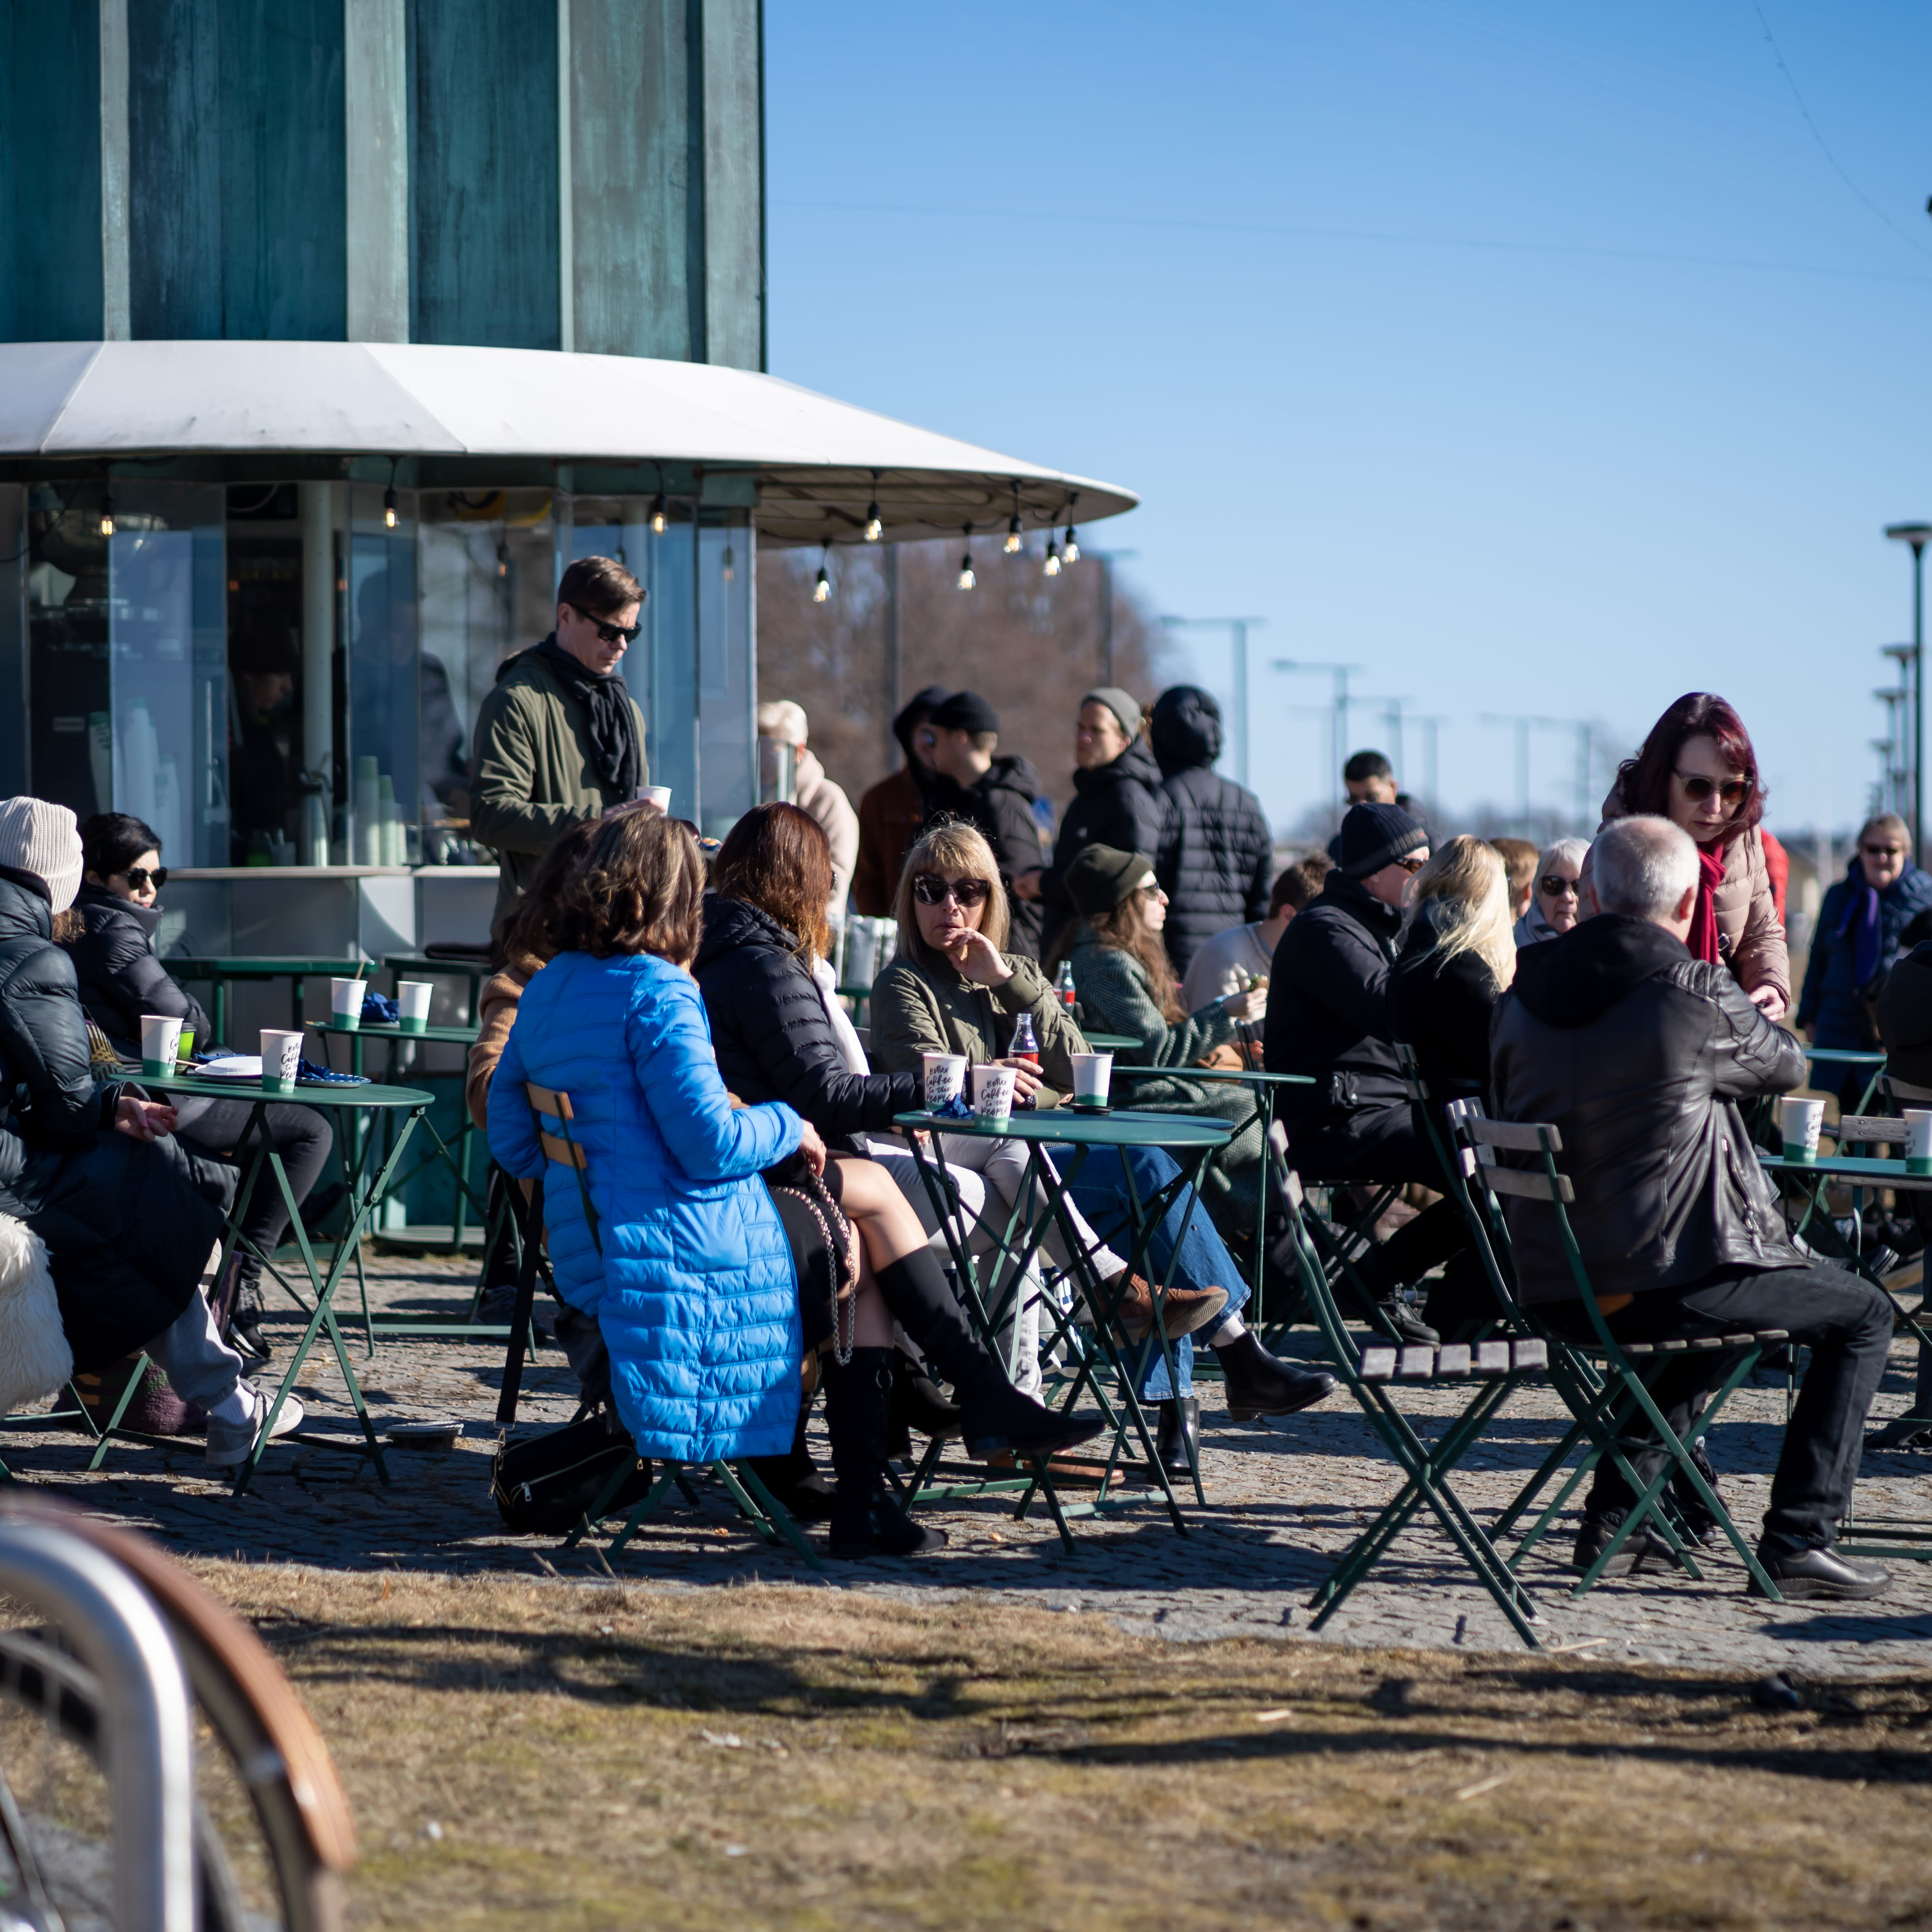 March was exceptionally sunny in Finland, the researchers say